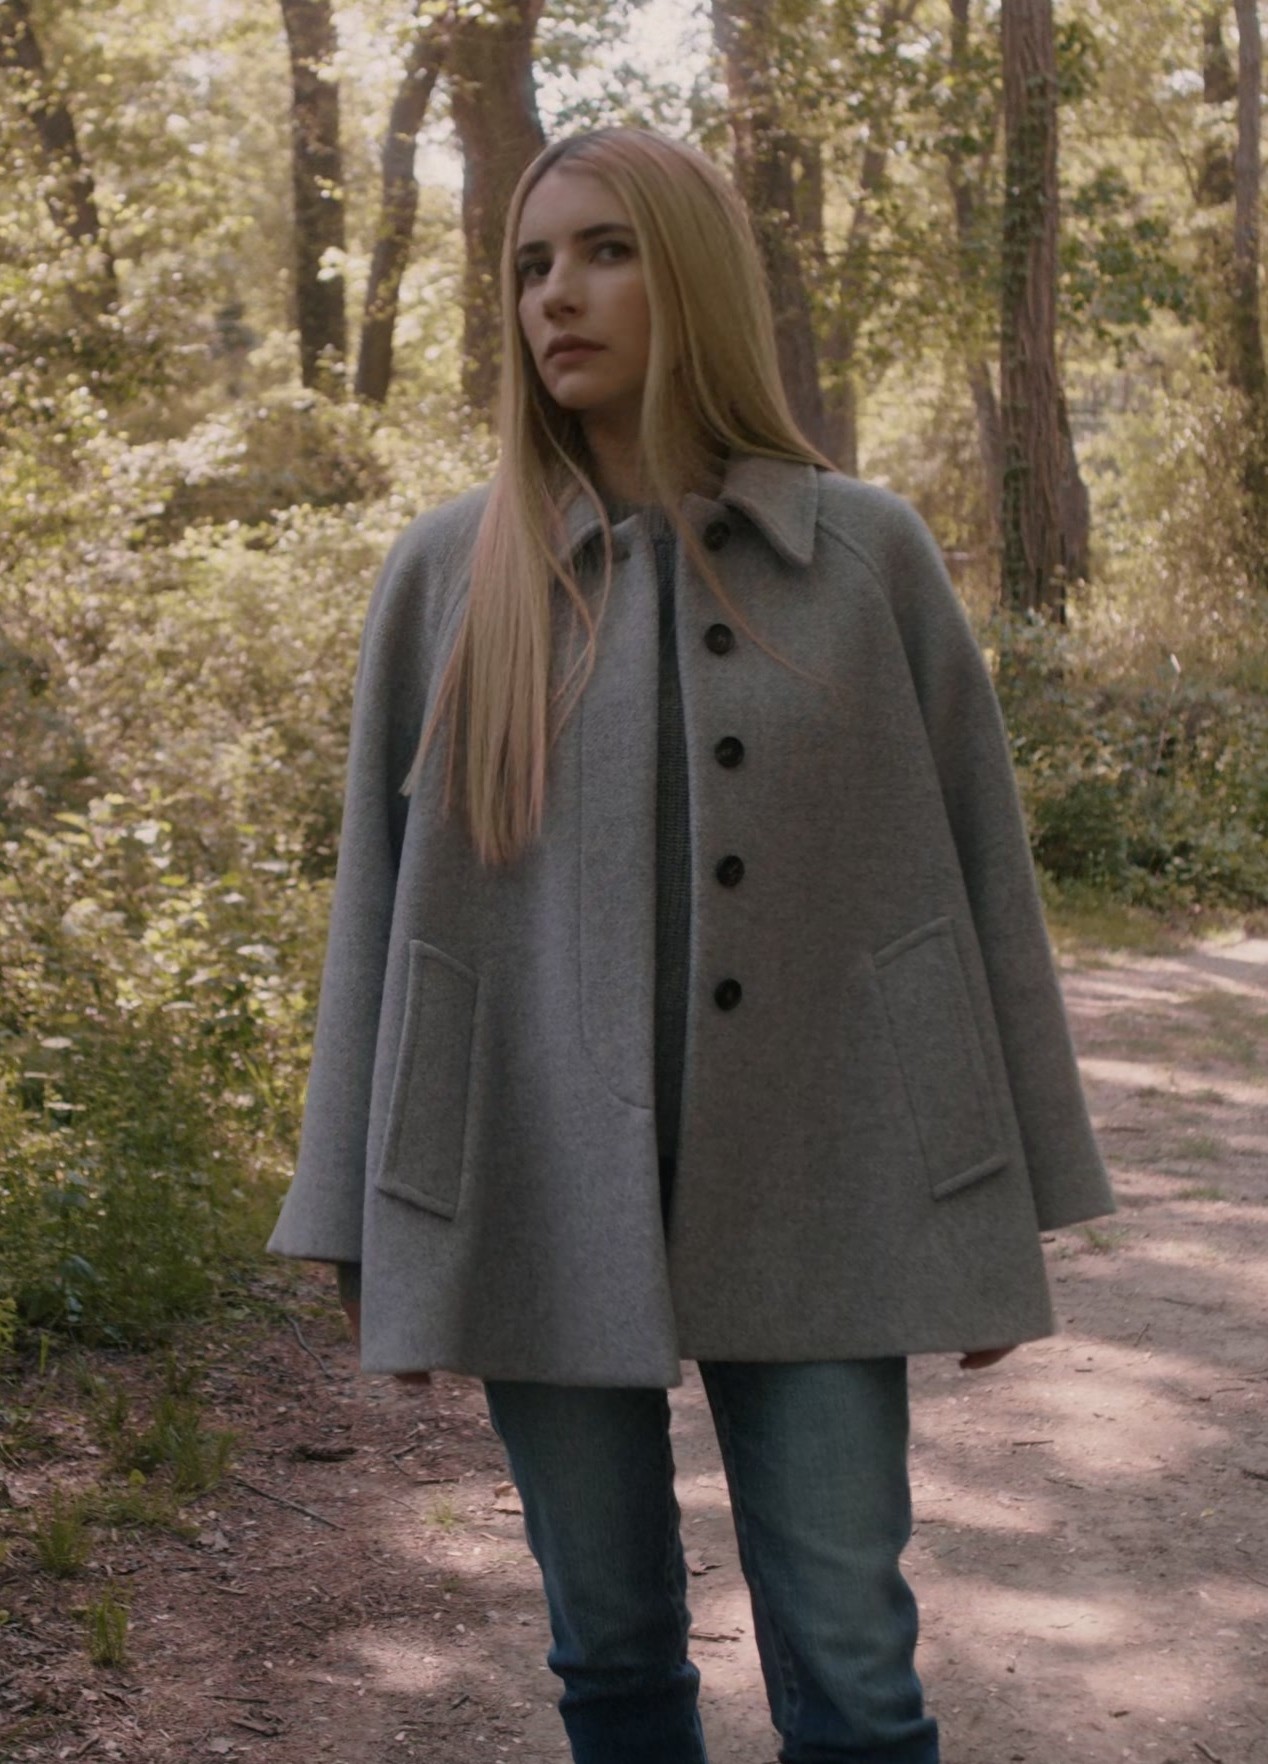 Worn on American Horror Story TV Show - Caped Wool-Blend Coat Worn by Emma Roberts as Anna Victoria Alcott